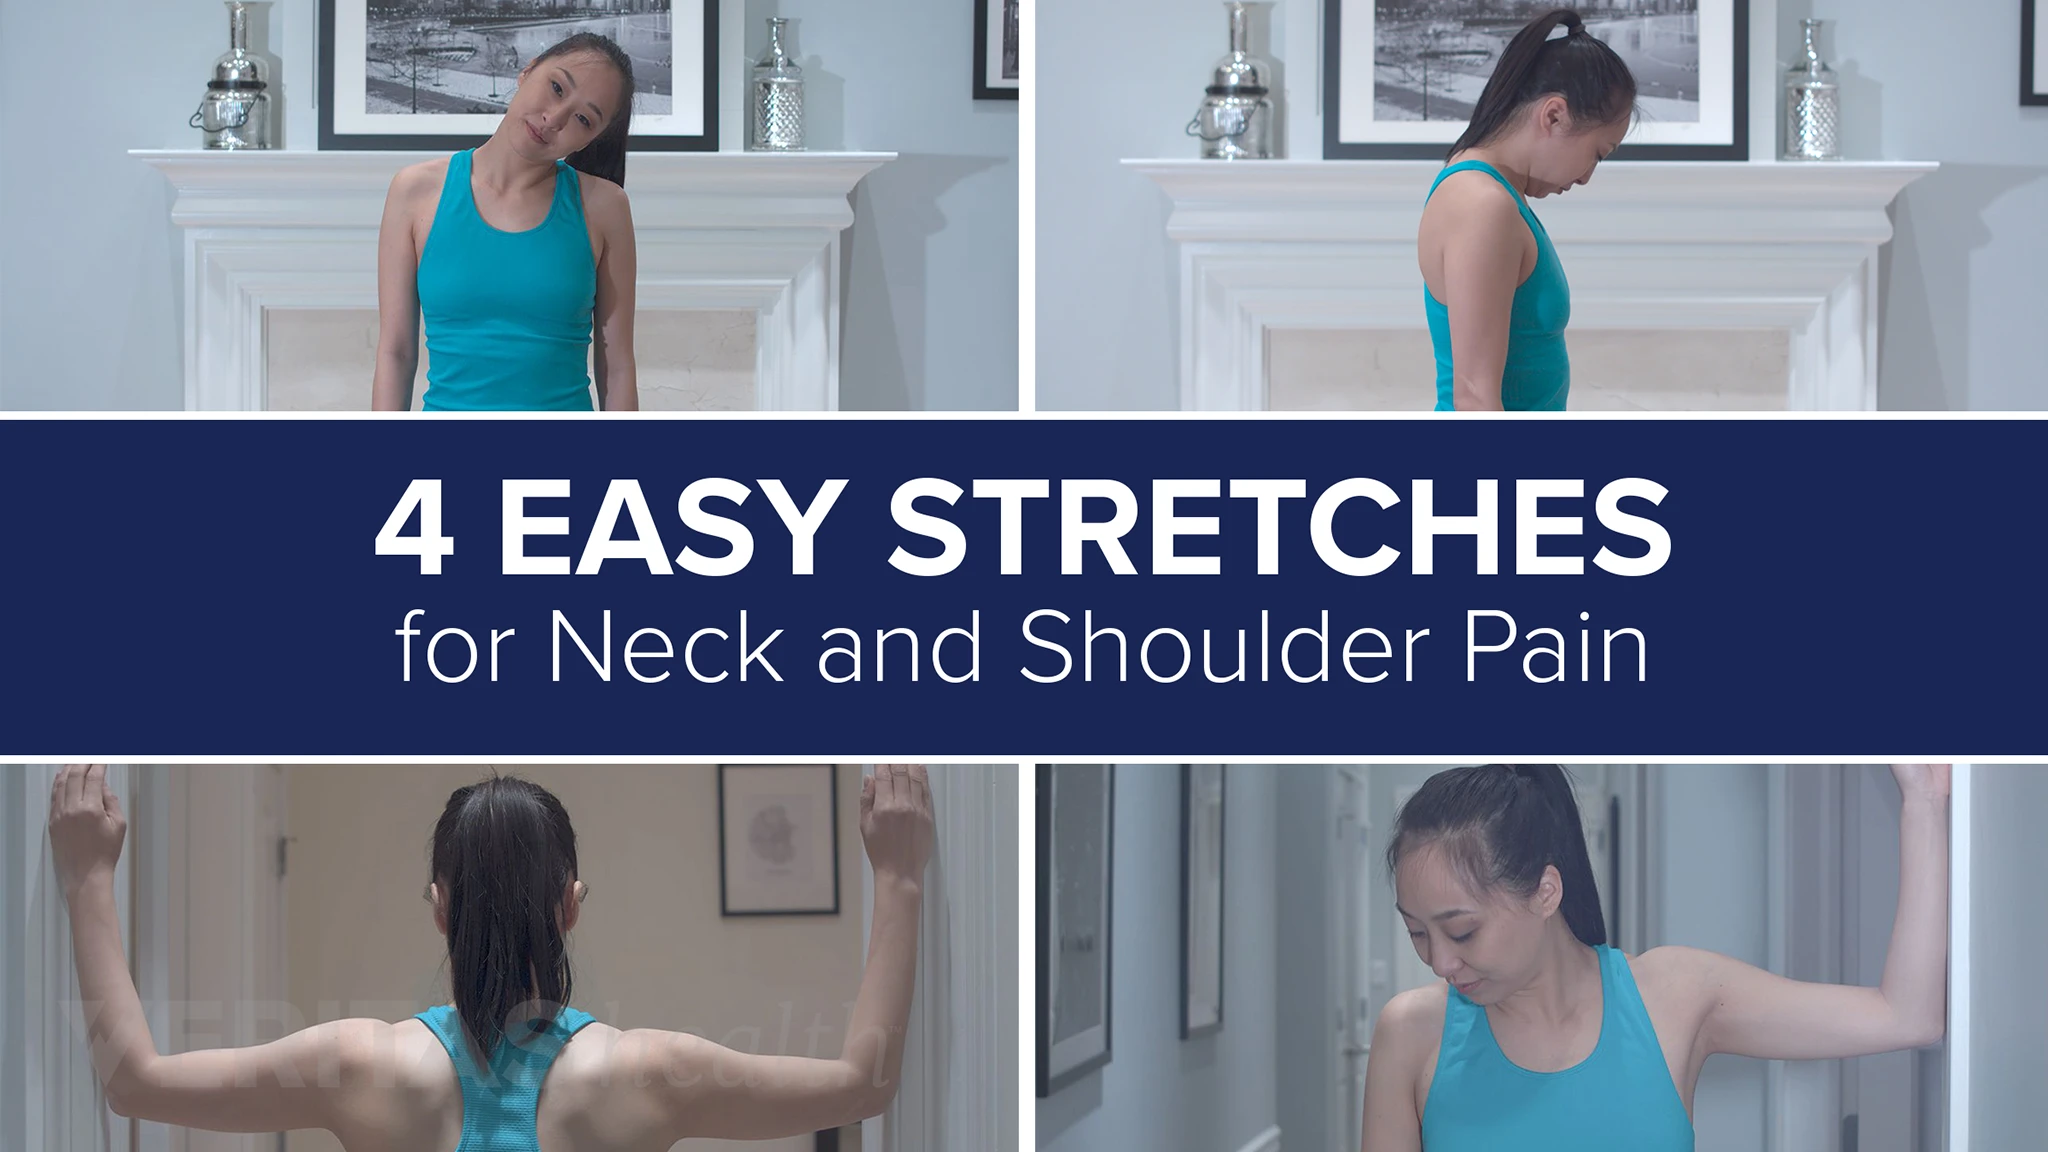 Neck Pain and Neck Tension Relief Exercise 